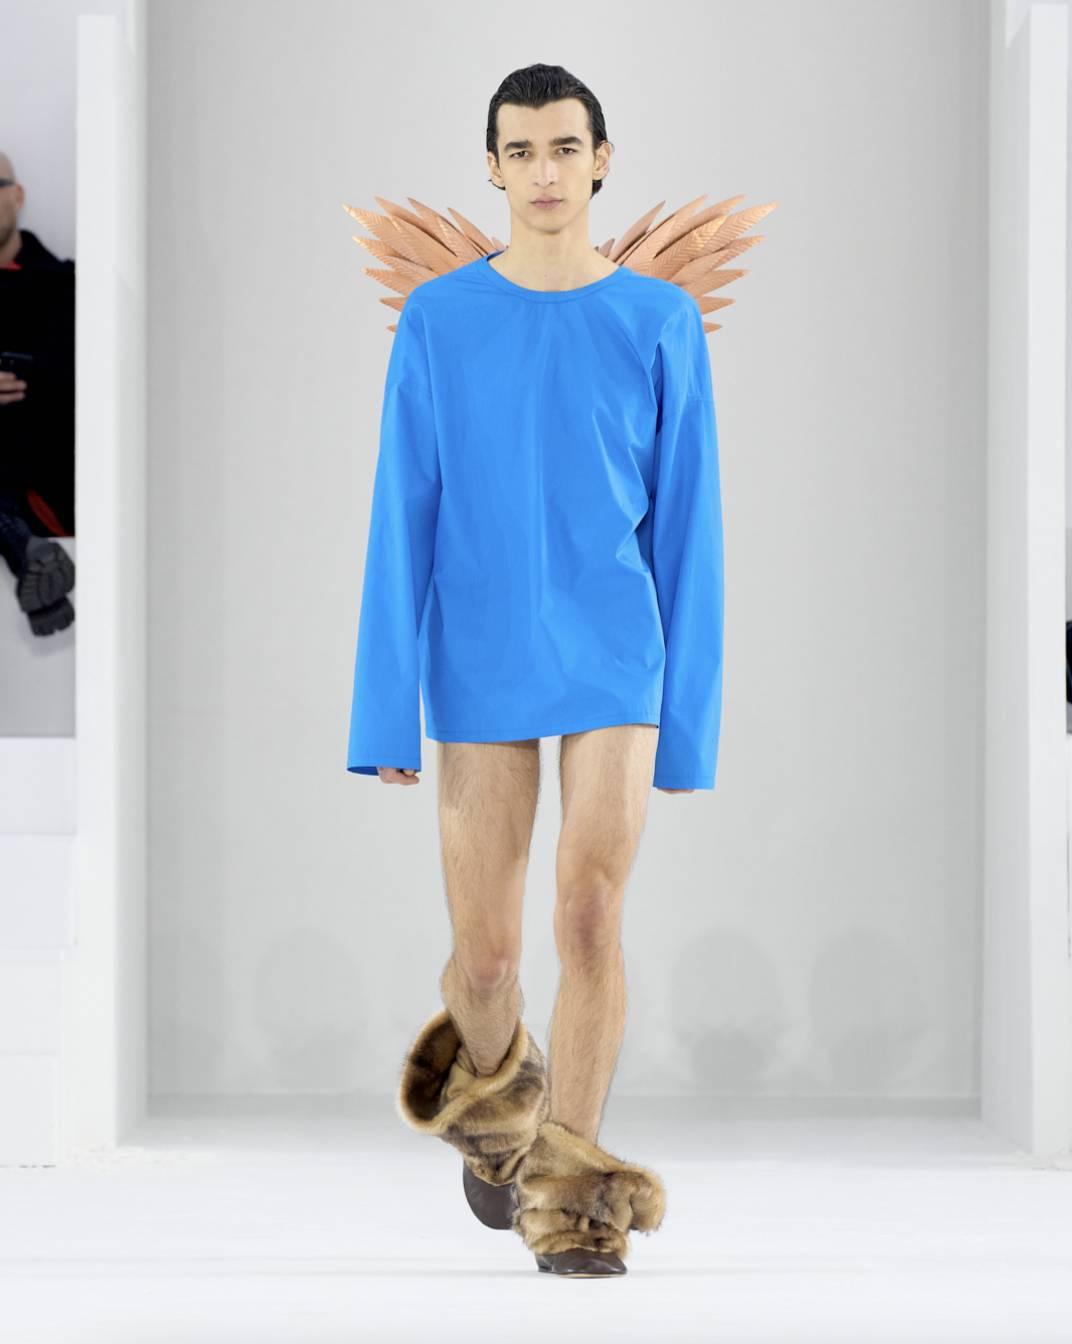 Designer Jonathan Anderson on the runway during the Loewe Fashion